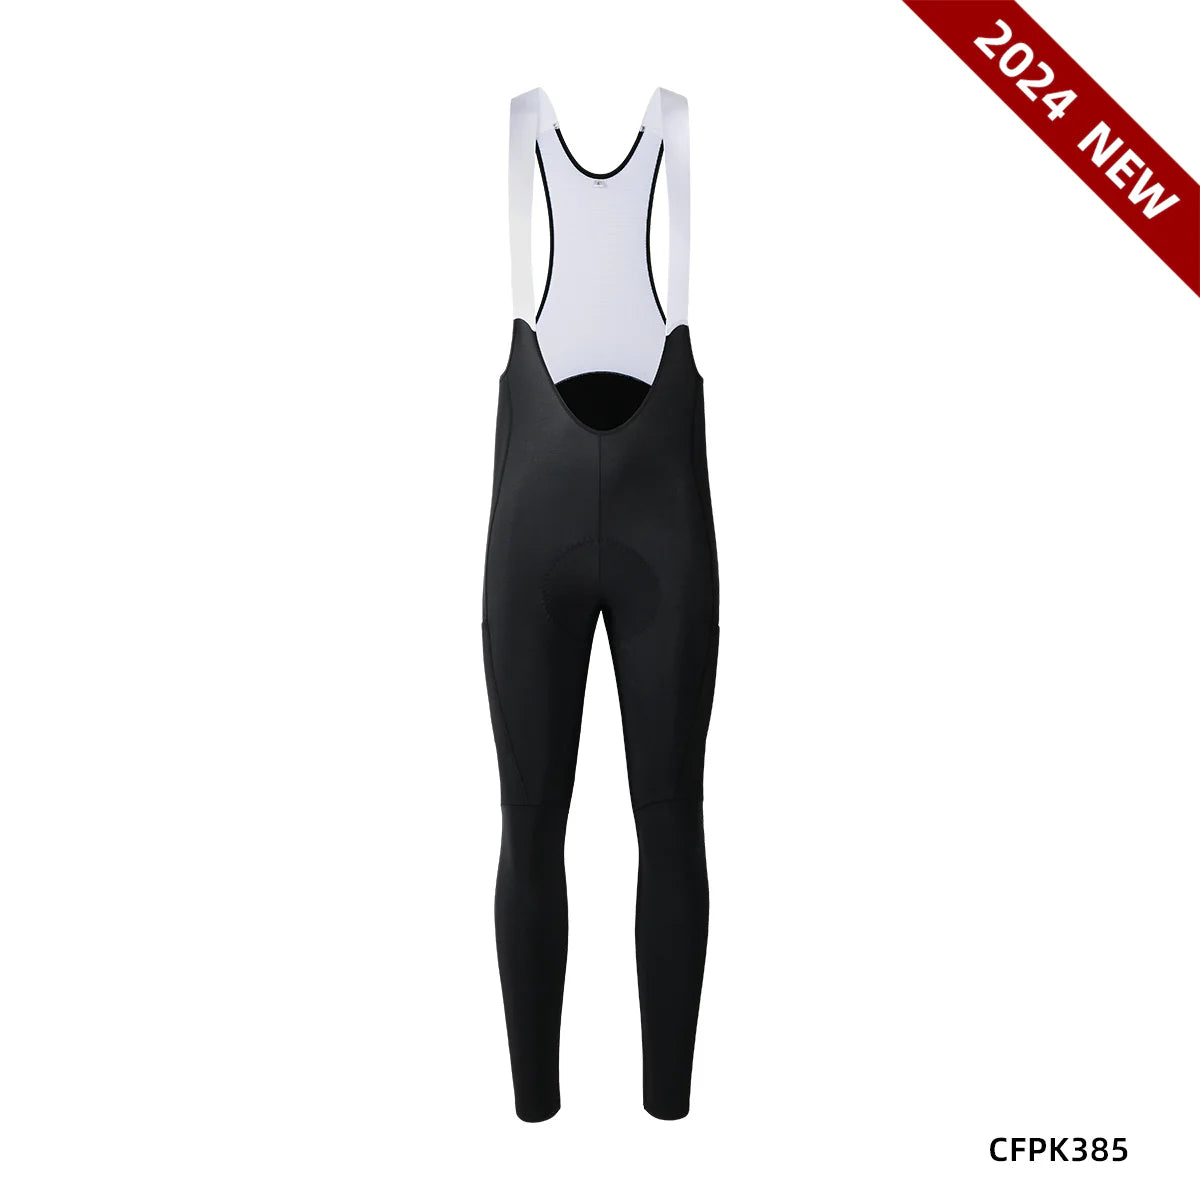 Discover the Ultimate Thermal Windproof Bib Tights for Men